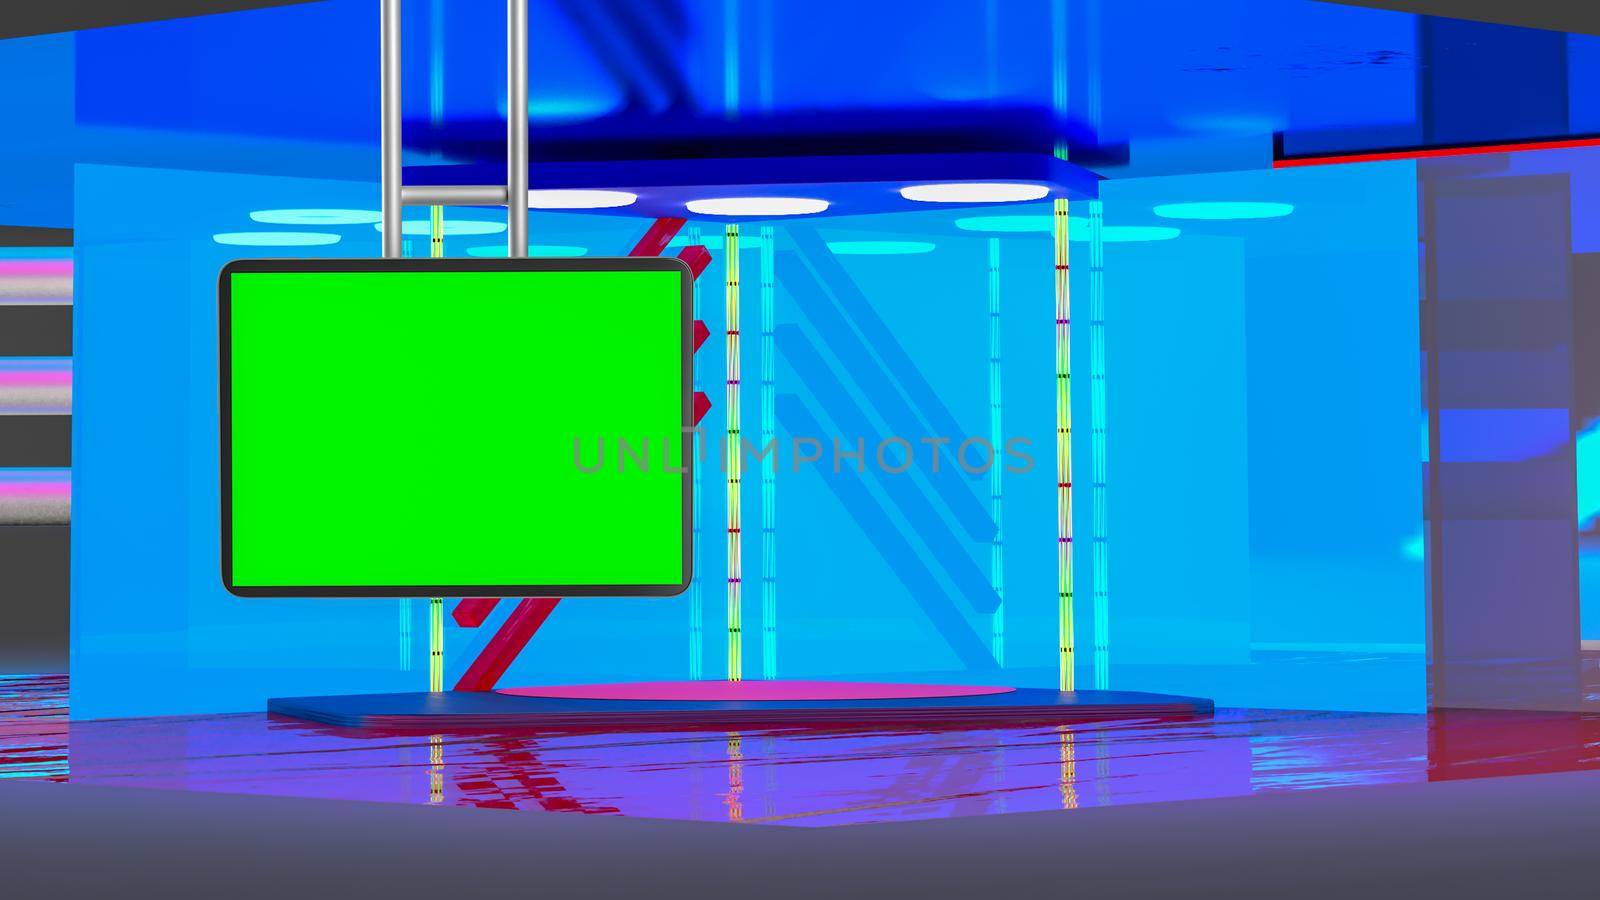 Virtual TV news broadcast studio set background with suspended greenscreen